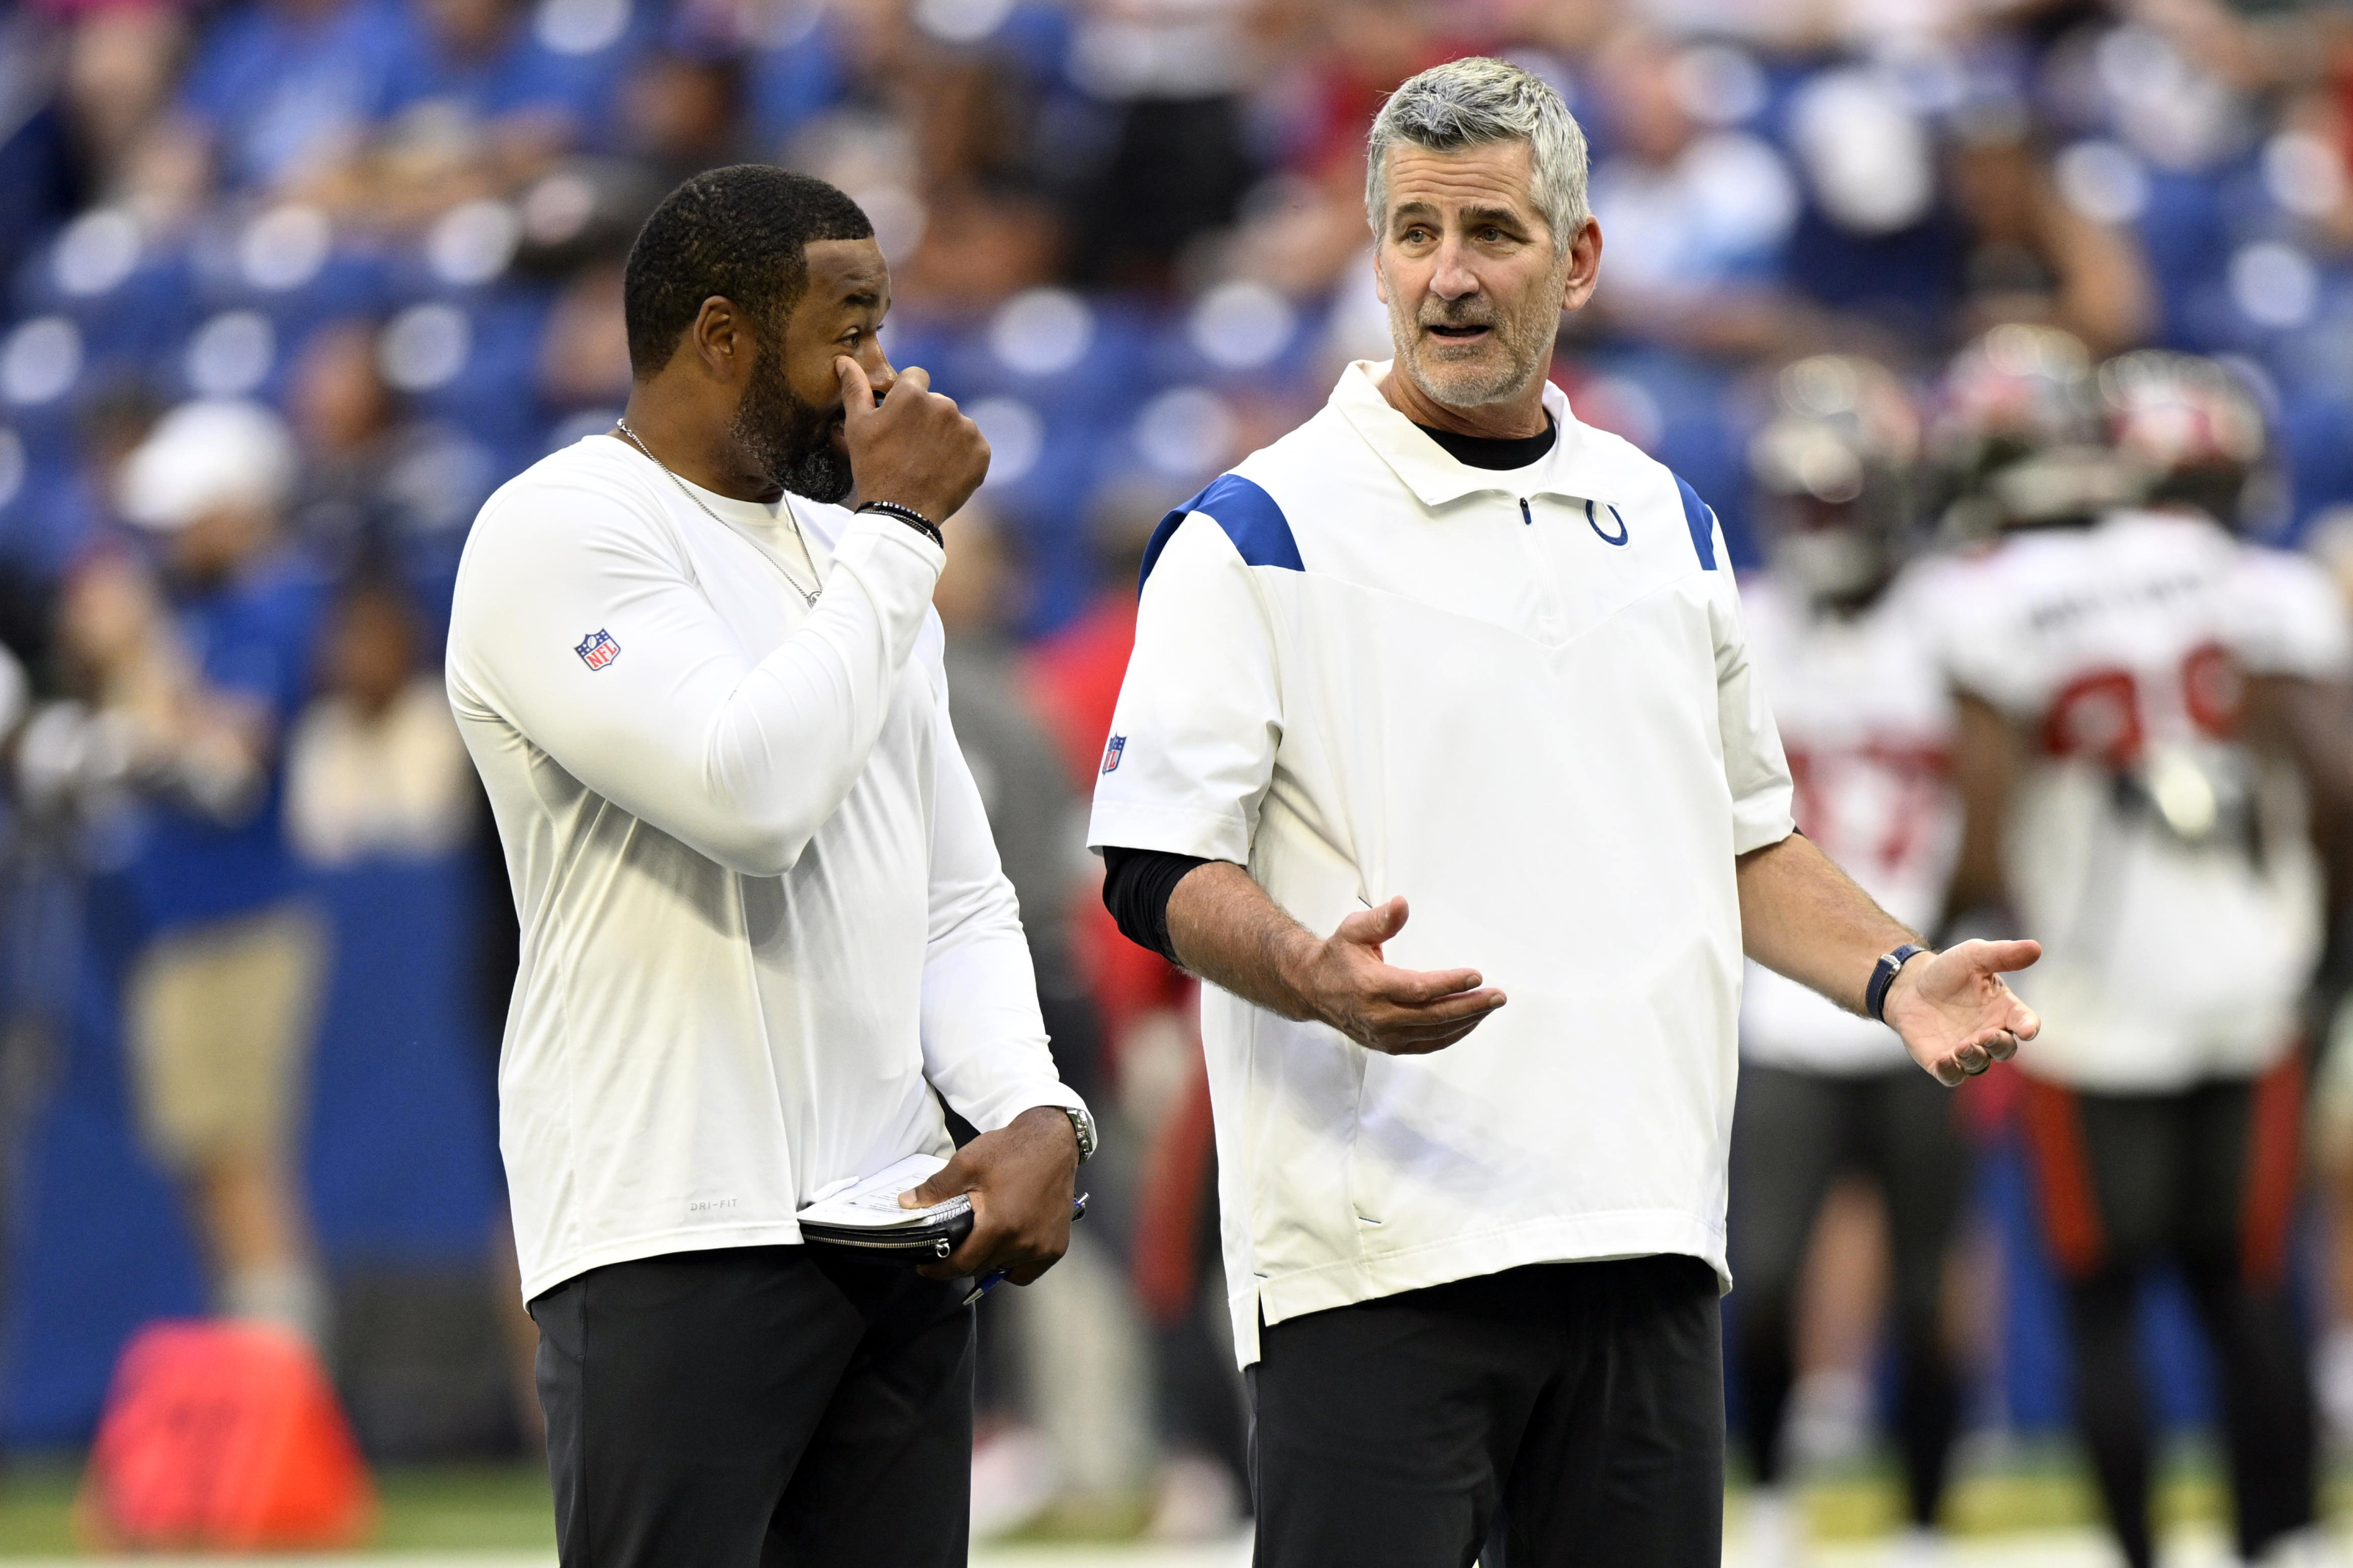 Indianapolis Colts: Is this the Final Season of the Frank Reich Era in Indy?